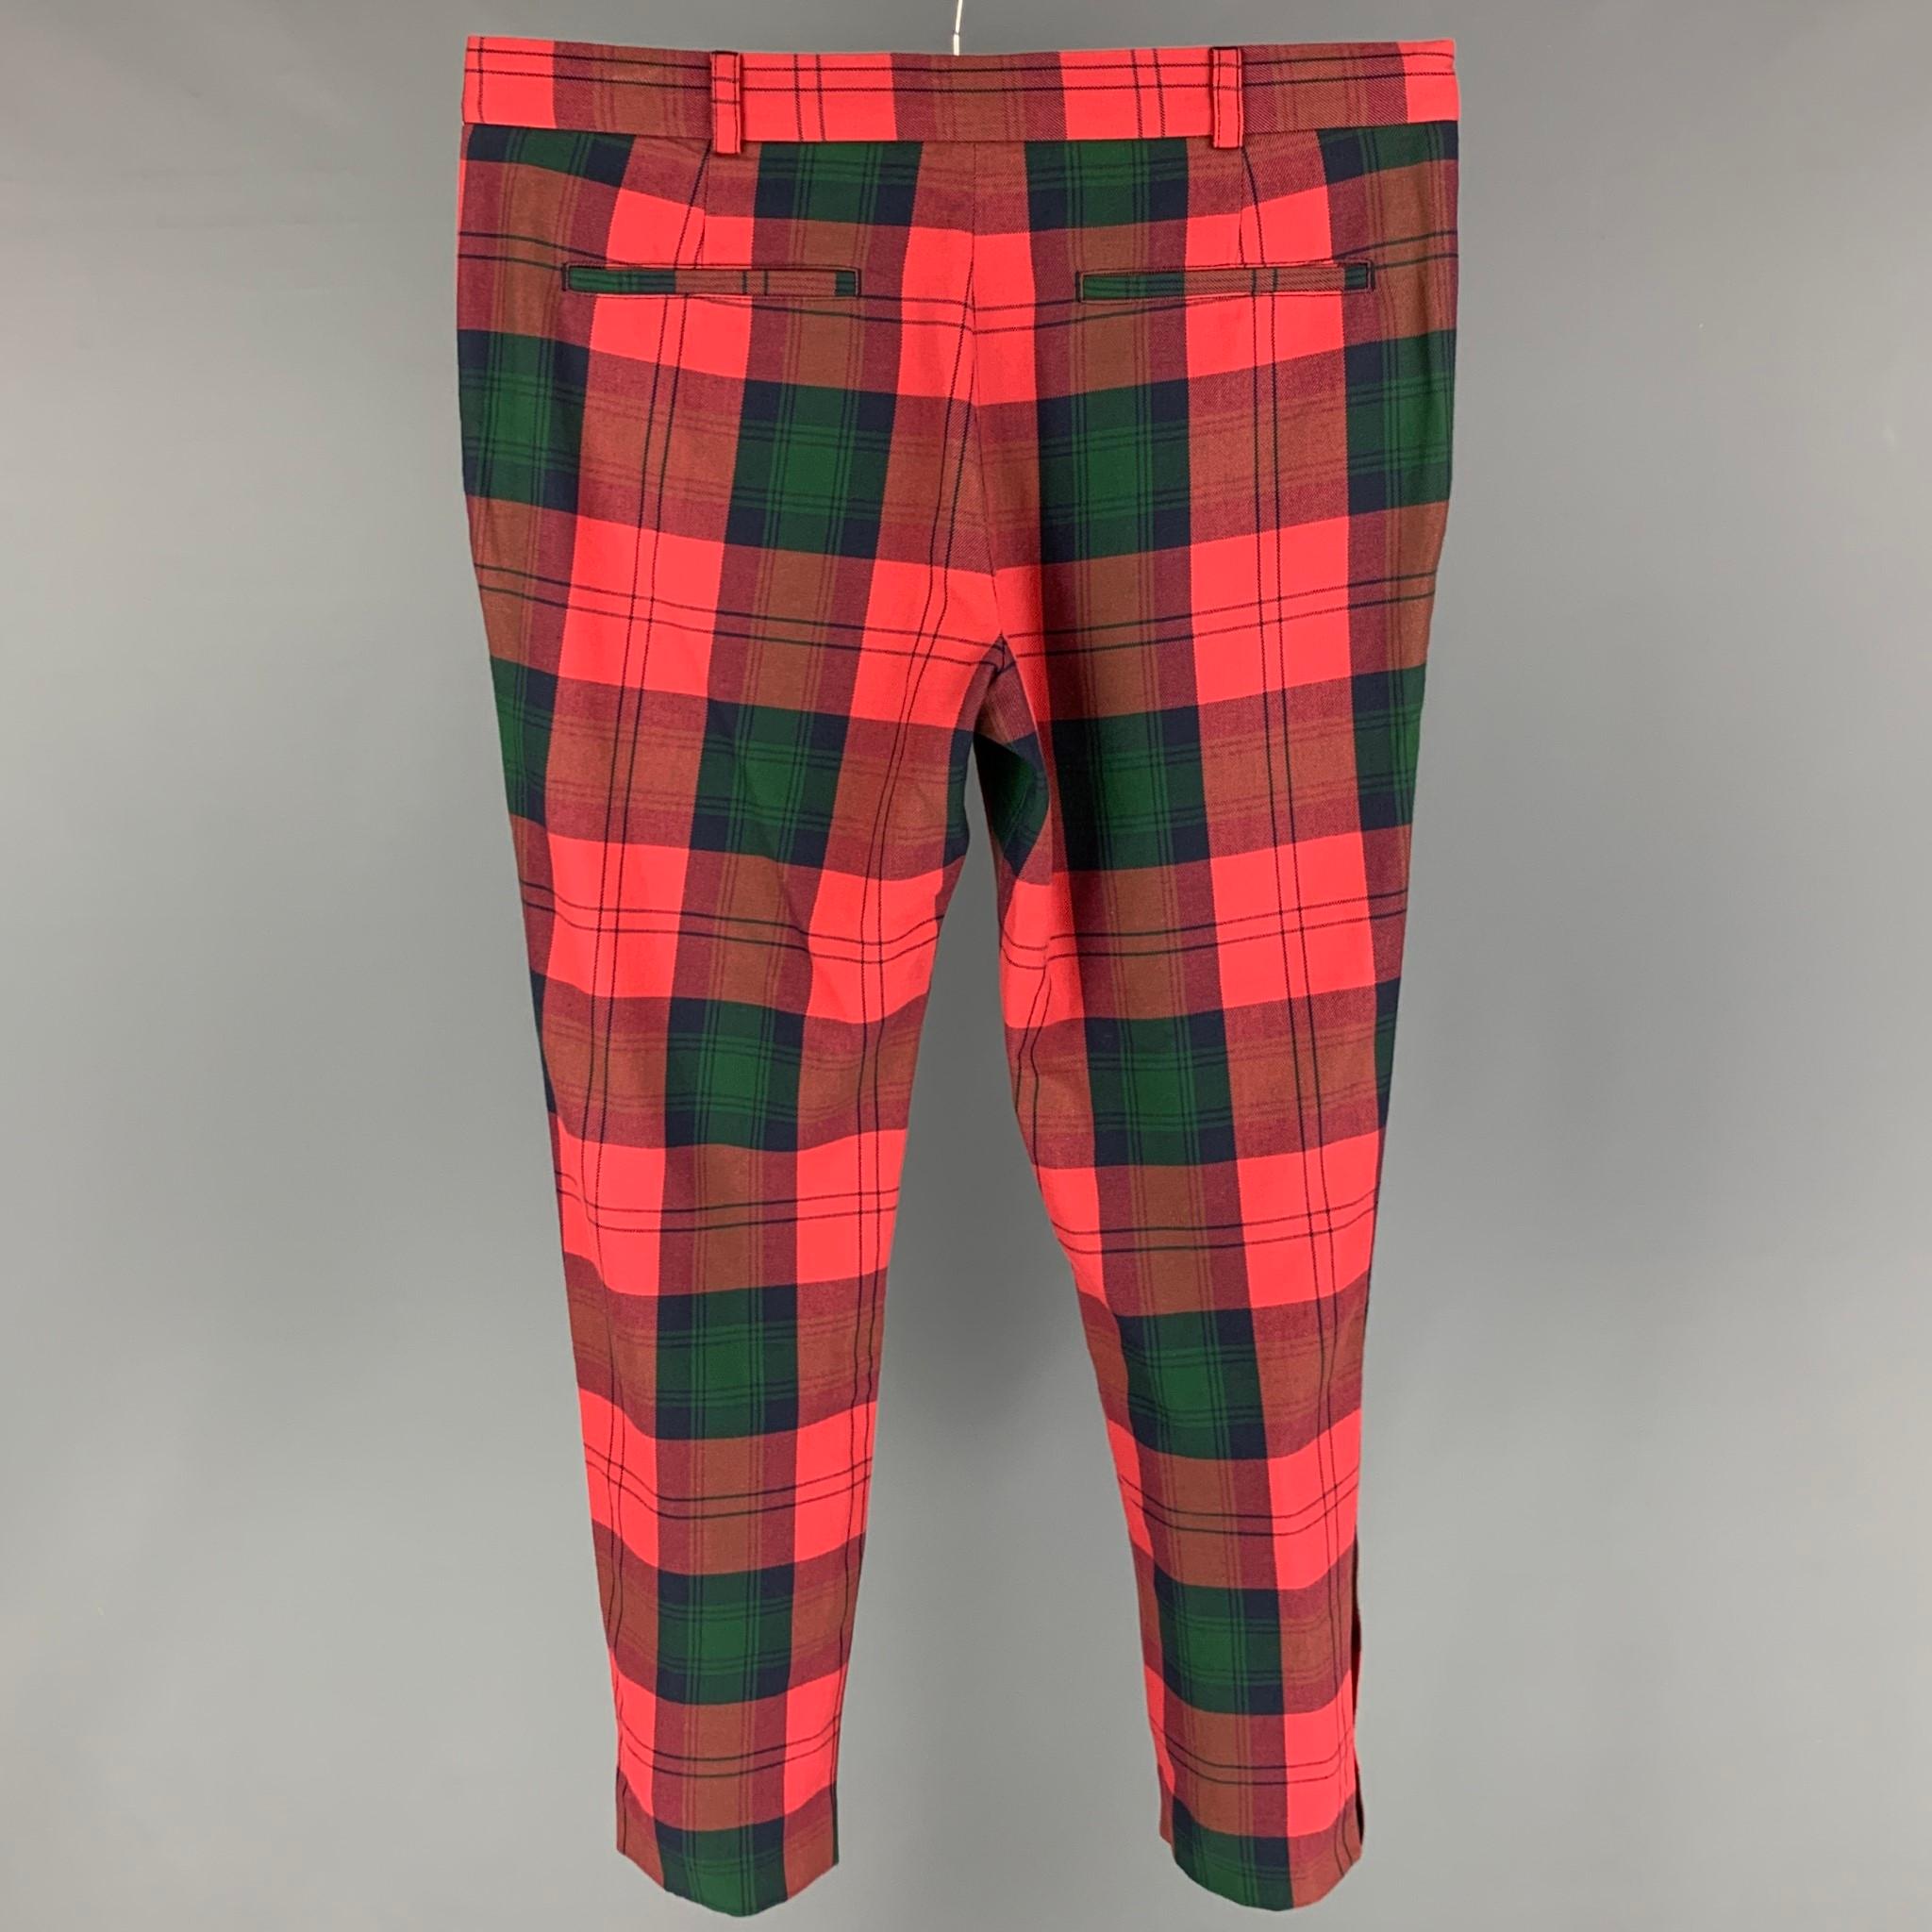 VERSUS by GIANNI VERSACE dress pants comes in a red & green plaid cotton featuring a flat front, silver tone hardware, and a zip fly closure. 

Excellent Pre-Owned Condition.
Marked: 50

Measurements:

Waist: 36 in.
Rise: 11 in.
Inseam: 28 in. 